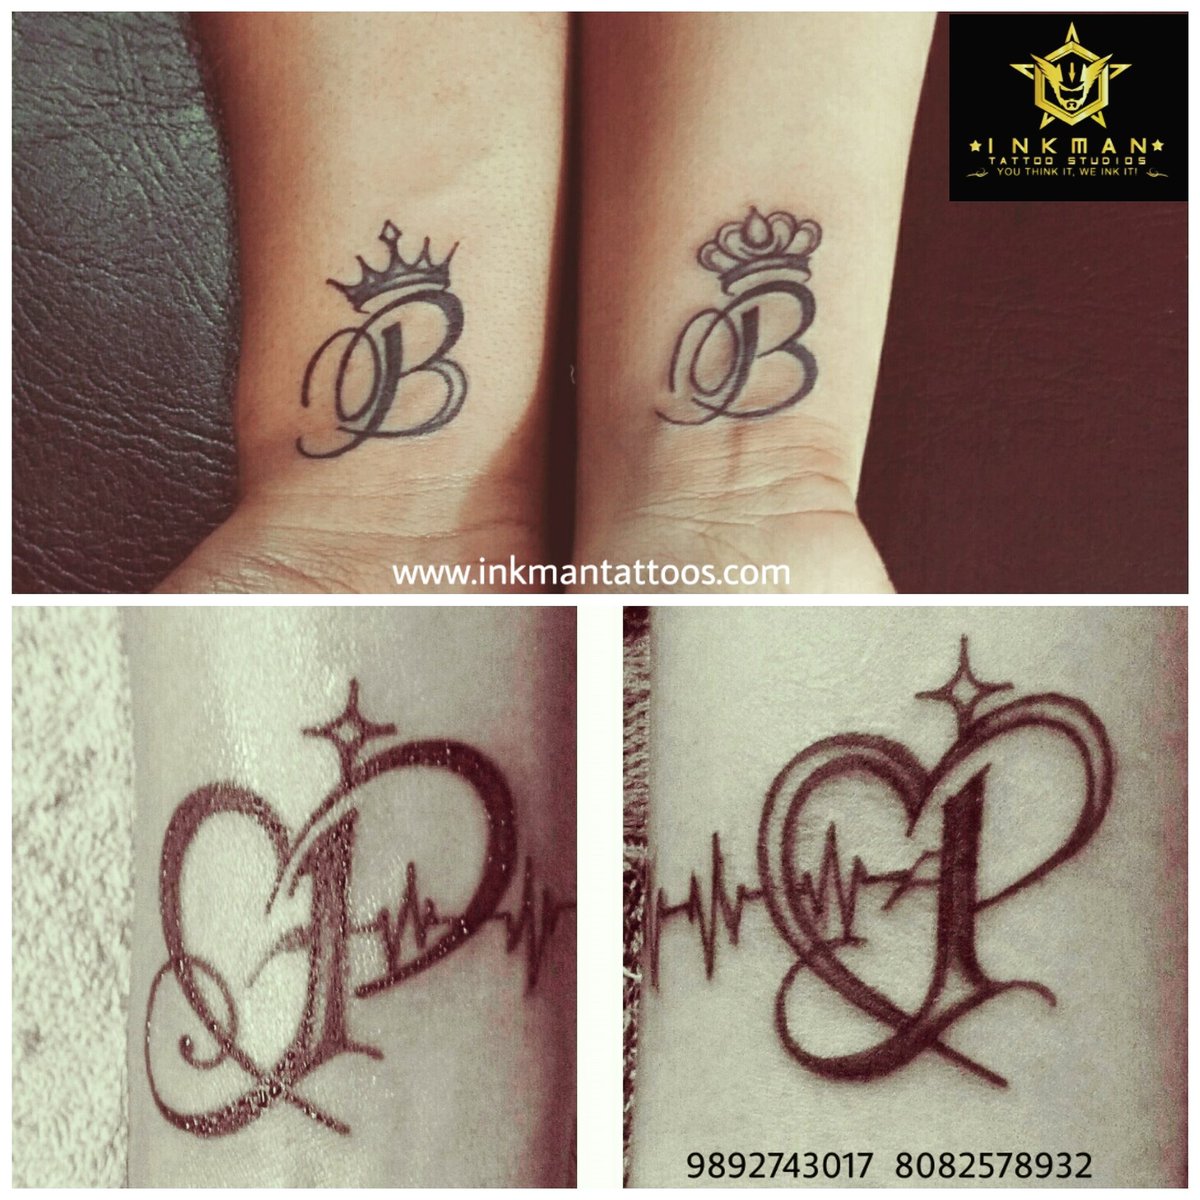 Buy Letter S Temporary Fake Tattoo Sticker set of 2 Online in India - Etsy